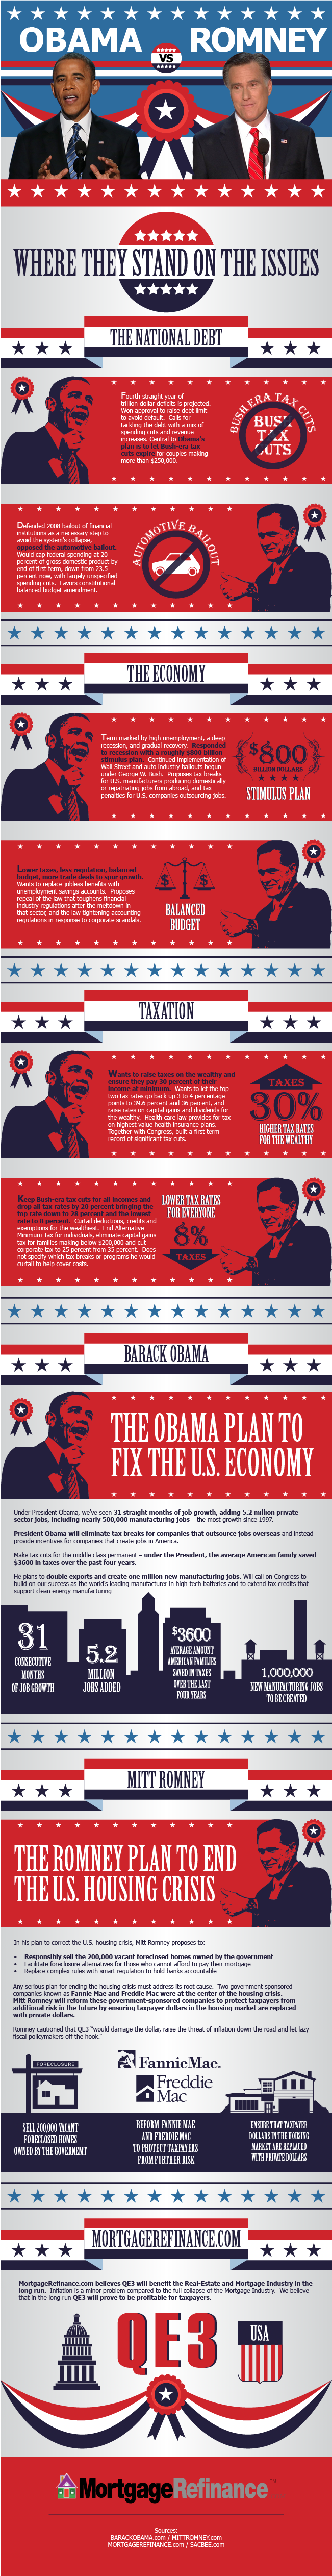 Obama vs. Romney Real-Estate and Mortgage Refinance (Infographic)